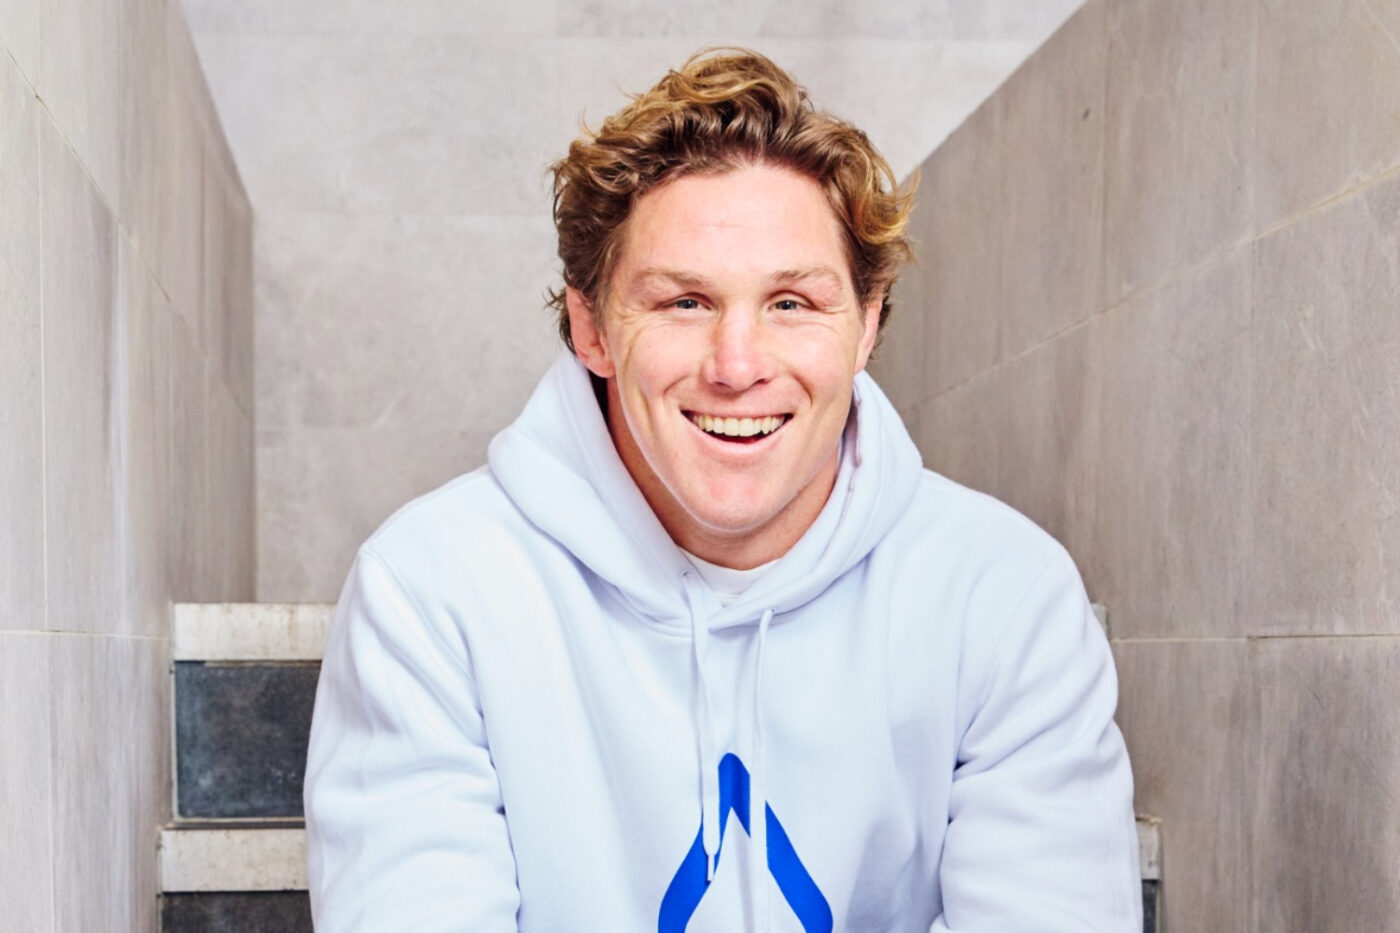 Former Wallabies Captain, Michael Hooper, On World Cup Snub, Mental Health And Olympic Dreams